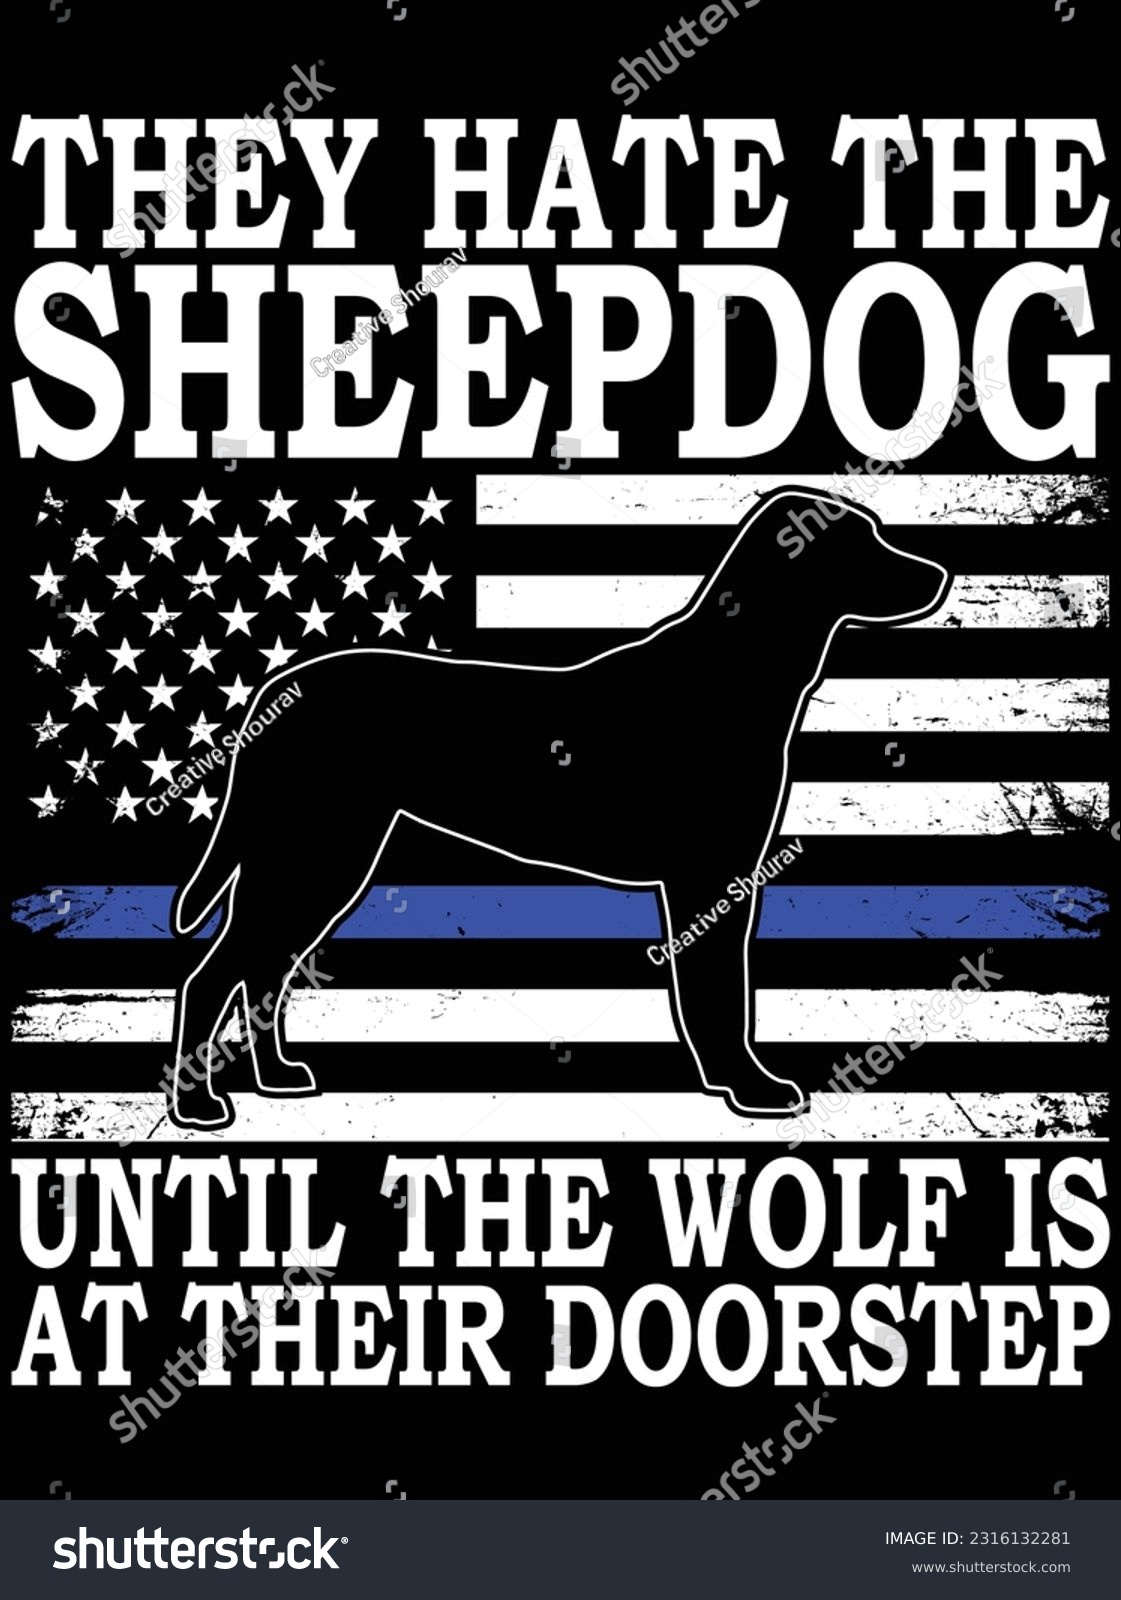 SVG of They hate the sheepdog until the wolf vector art design, eps file. design file for t-shirt. SVG, EPS cuttable design file svg